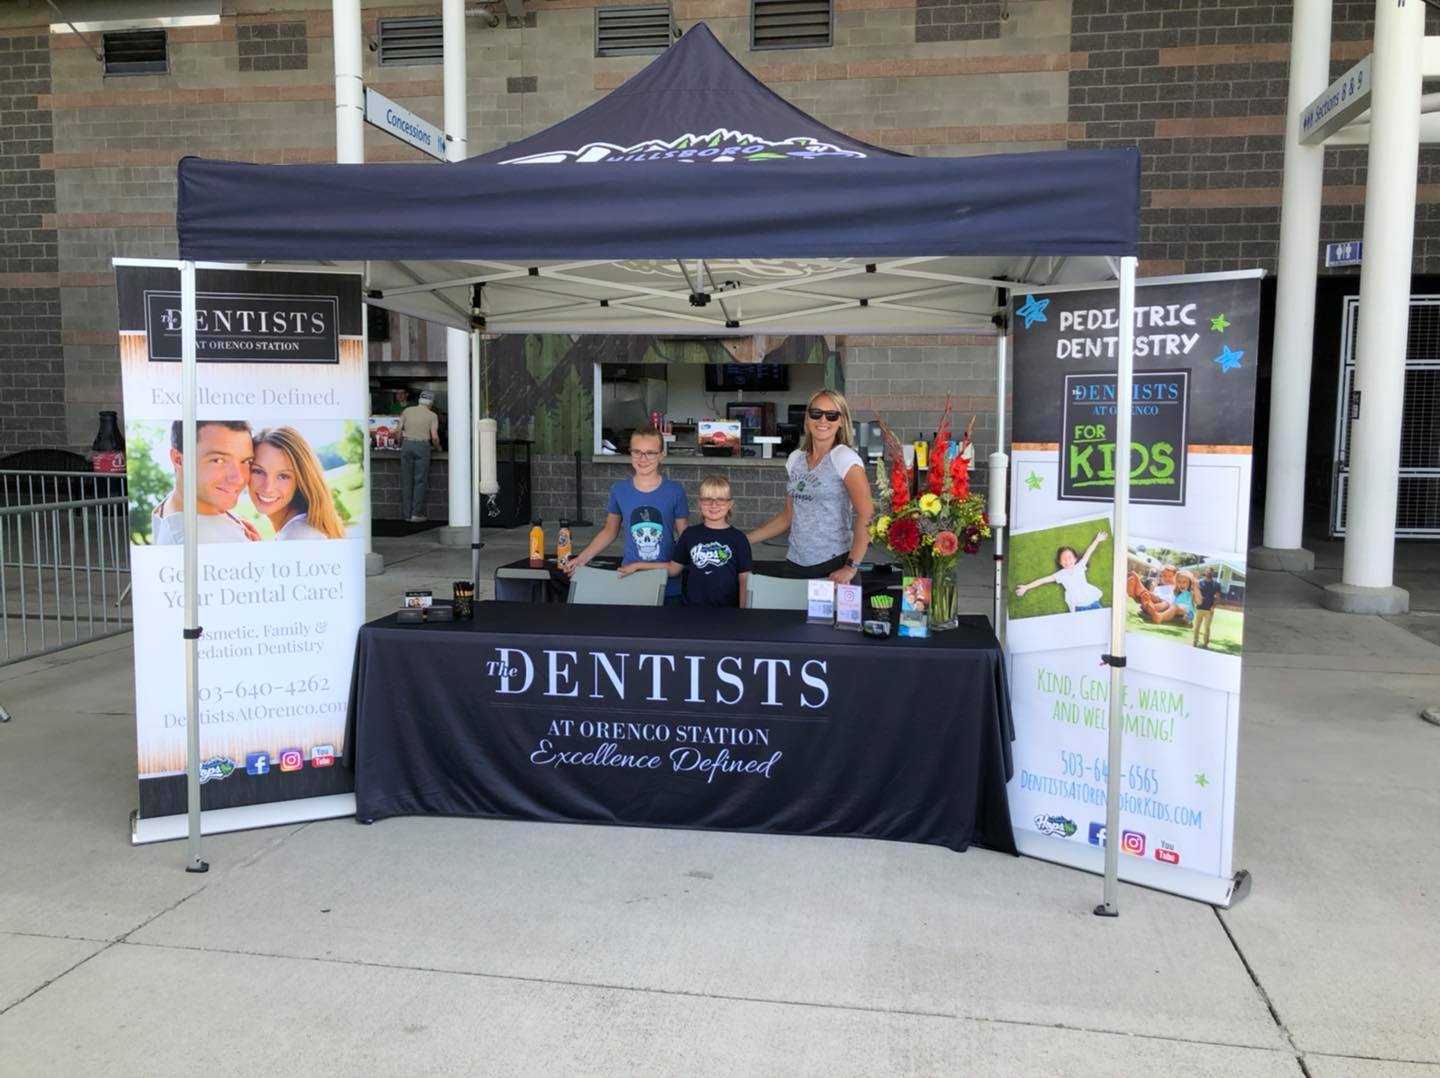 Woman with two children at desk and tent for The Dentists at Orenco Station at Hillsboro community event